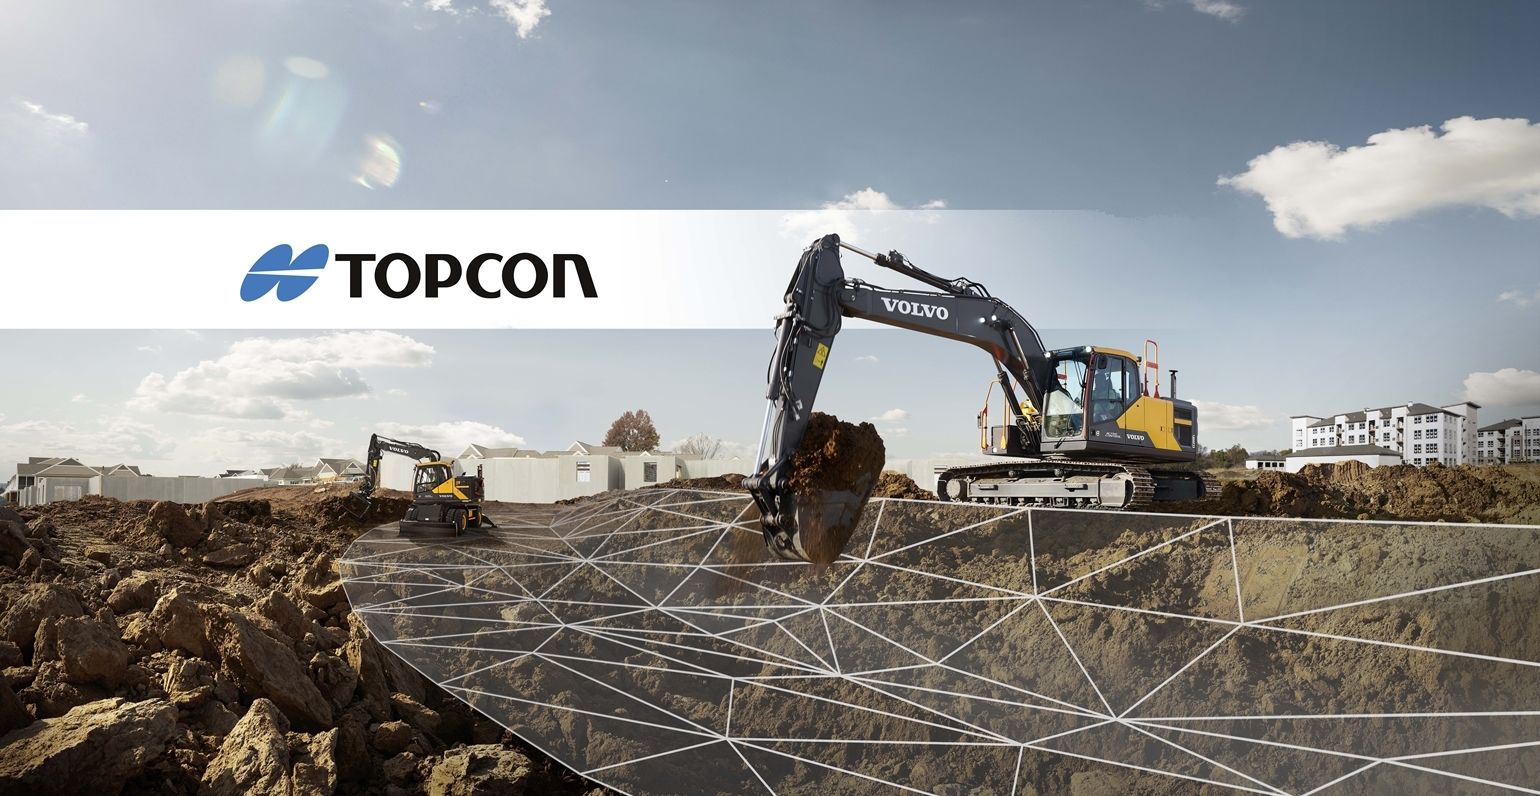 The integration of Topcon's 3D-MC positioning systems will enable increased automation in digging trenches, grading slopes and creating site profiles